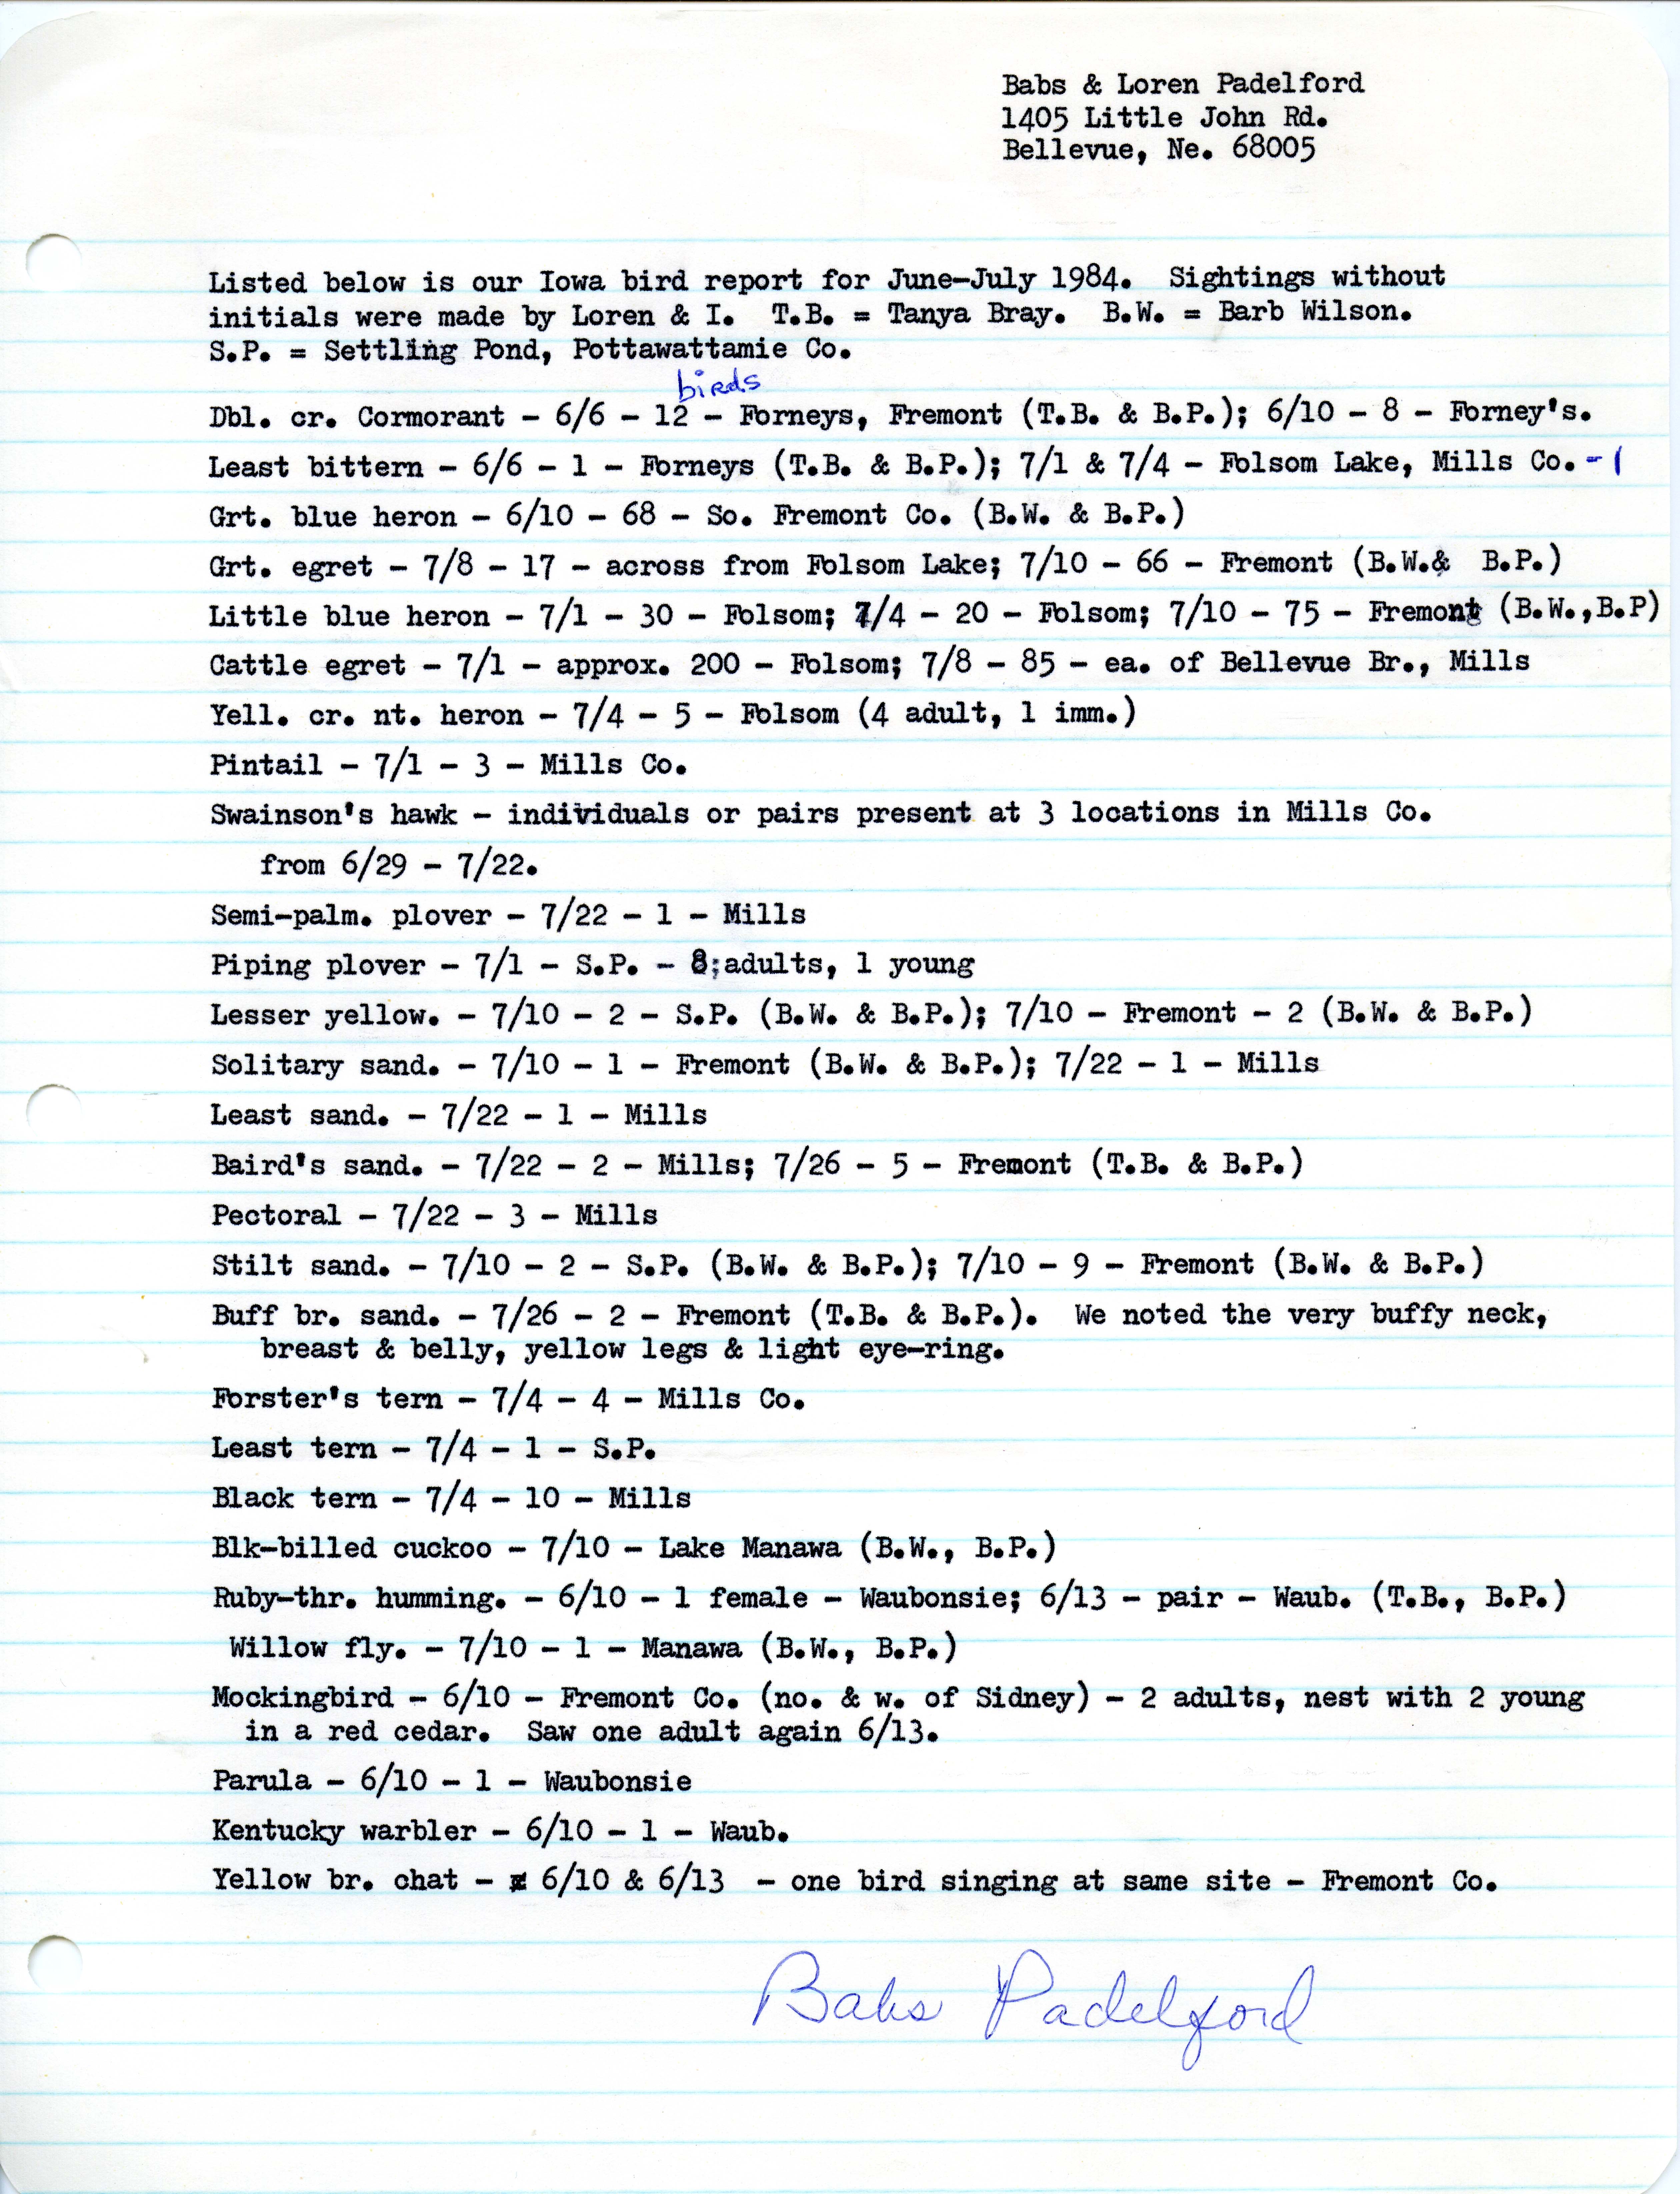 Field notes contributed by Babs and Loren Padelford on Iowa birds sighted, June-July 1984